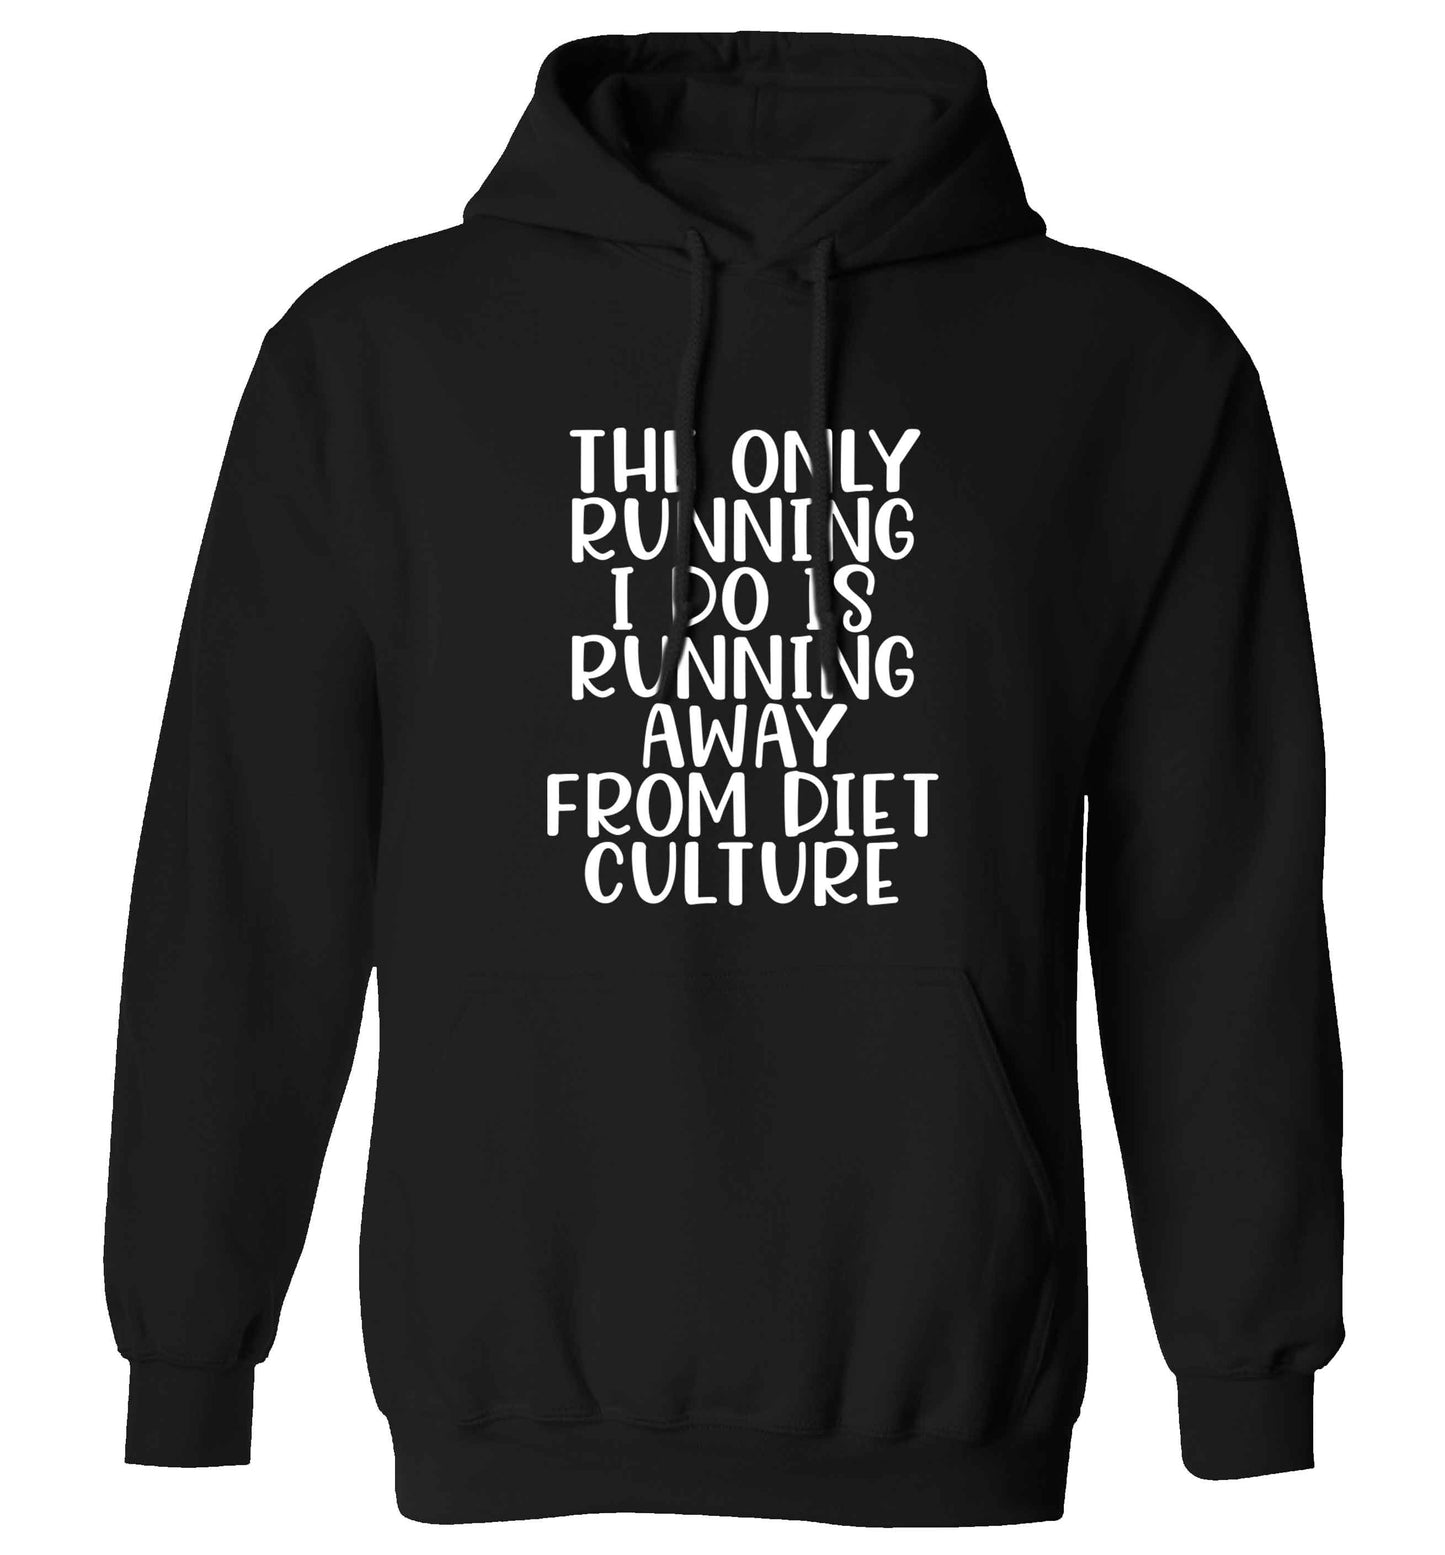 The only running I do is running away from diet culture adults unisex black hoodie 2XL